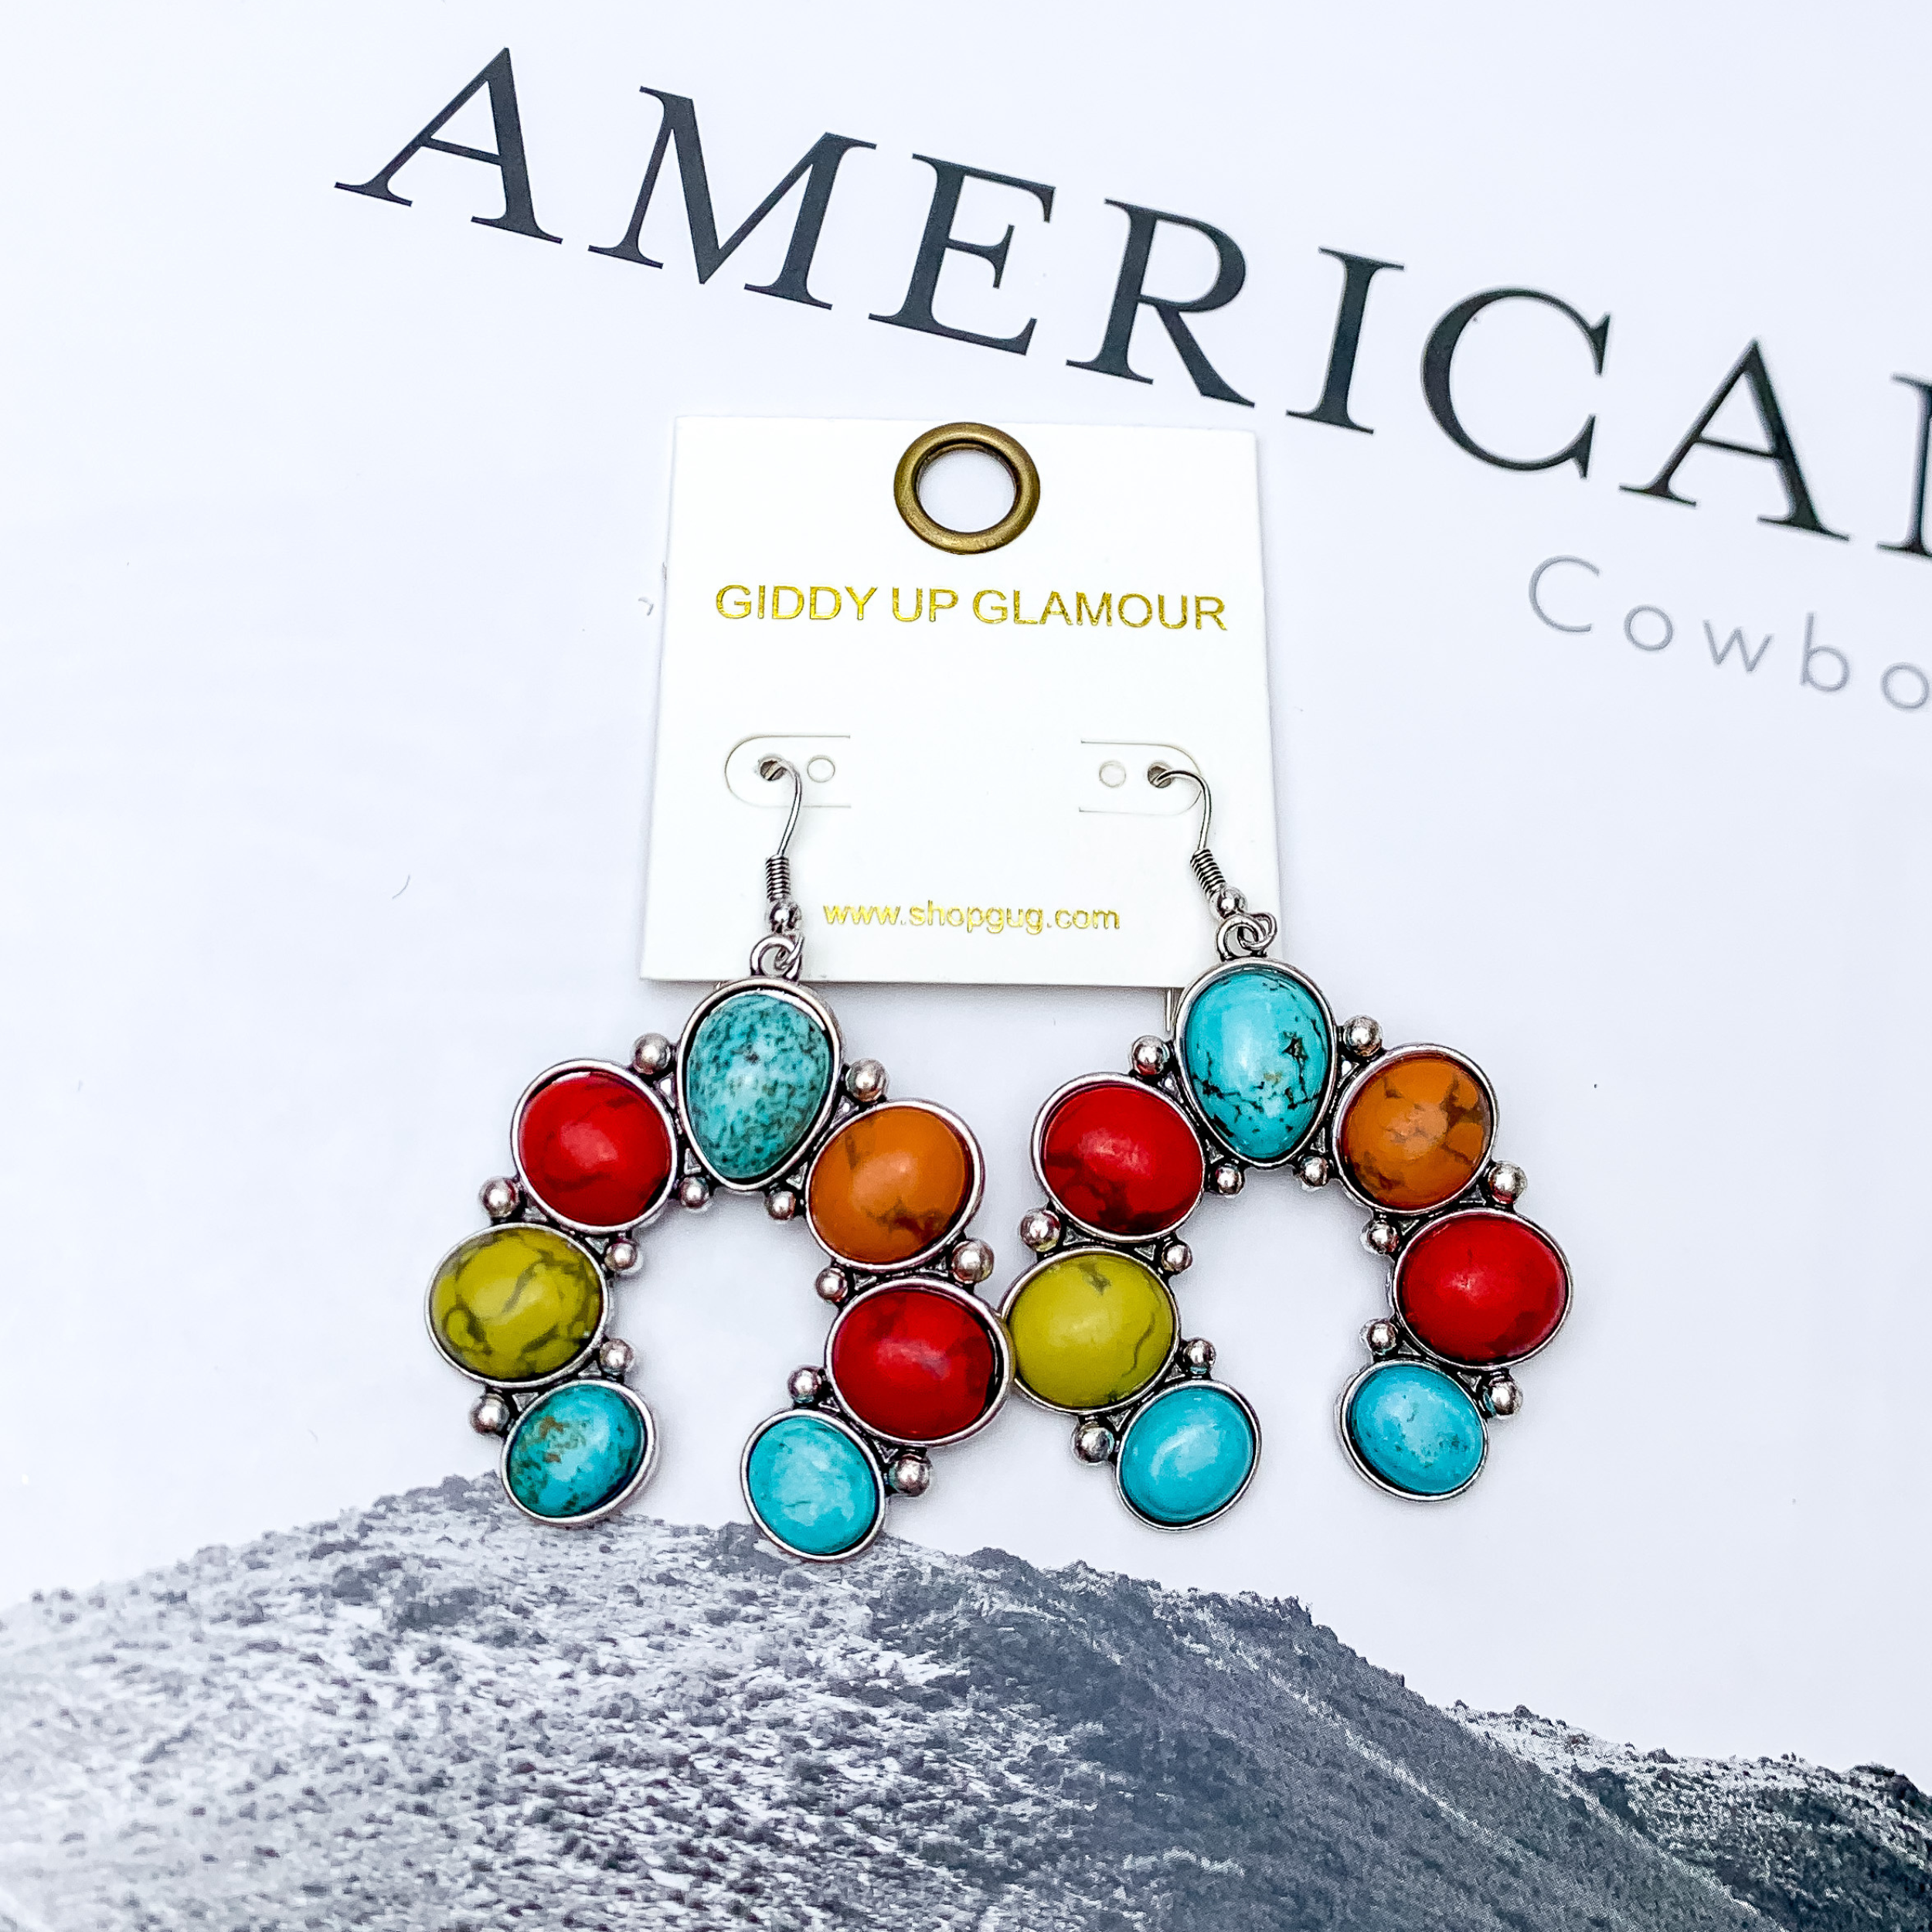 Squash Blossom Stone Earrings In Multicolor. Pictured on a white background with a western scene in the back.